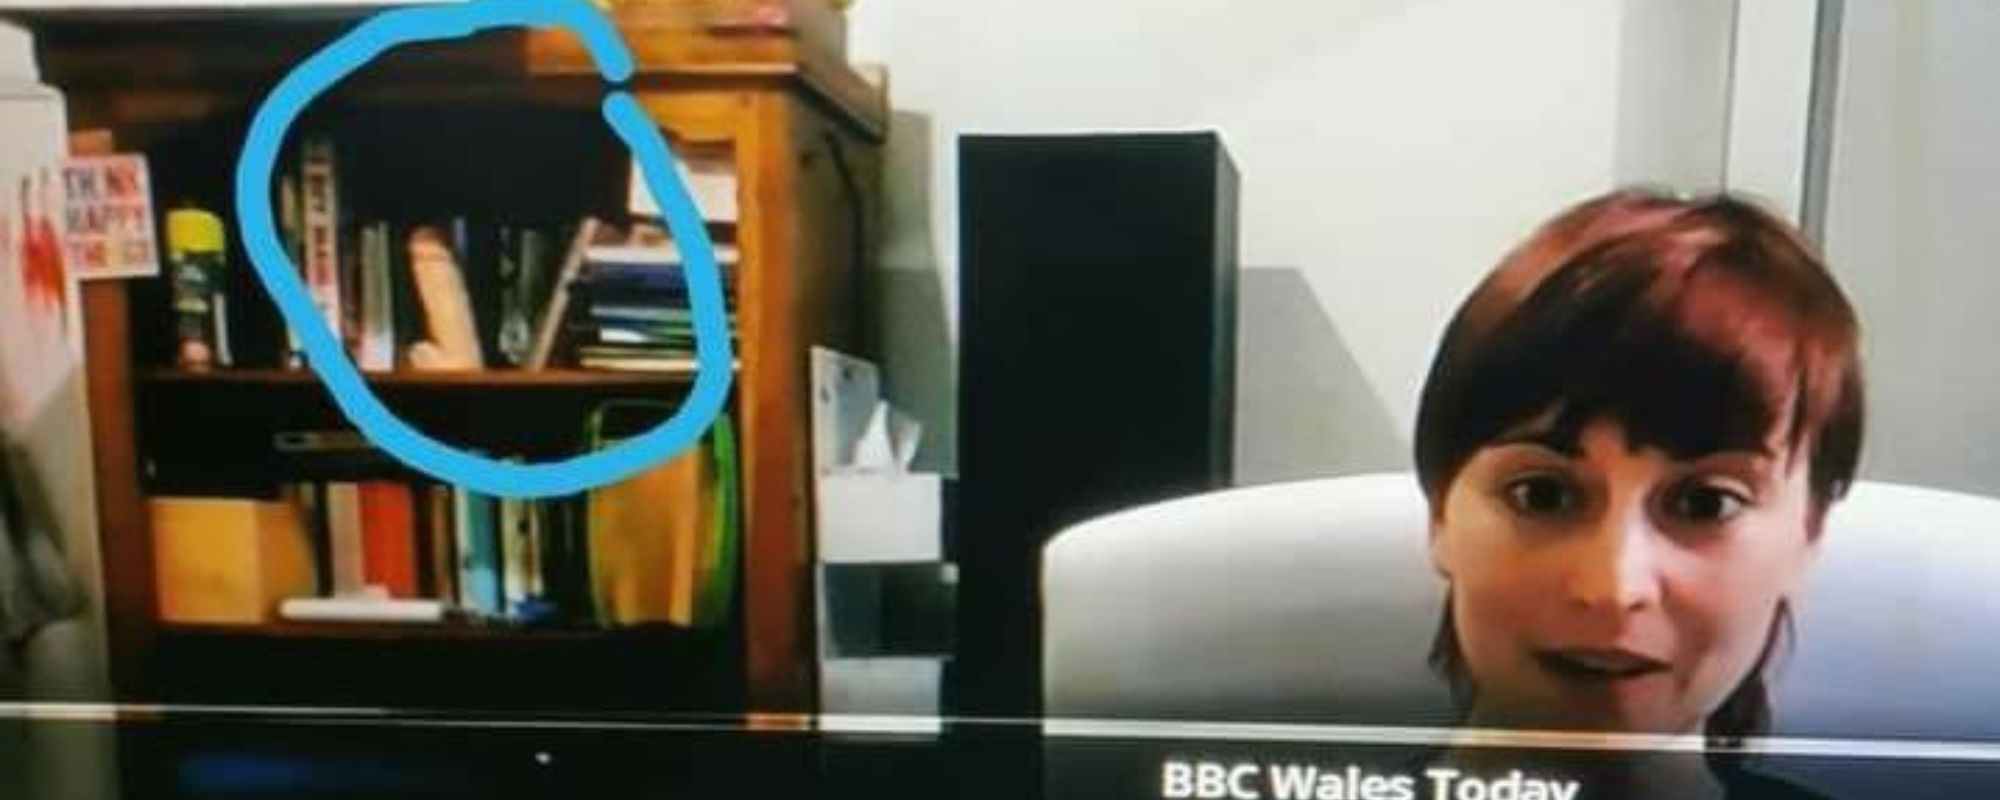 Woman Accidentally Left Her Dildo on Bookshelf During News Interview image pic